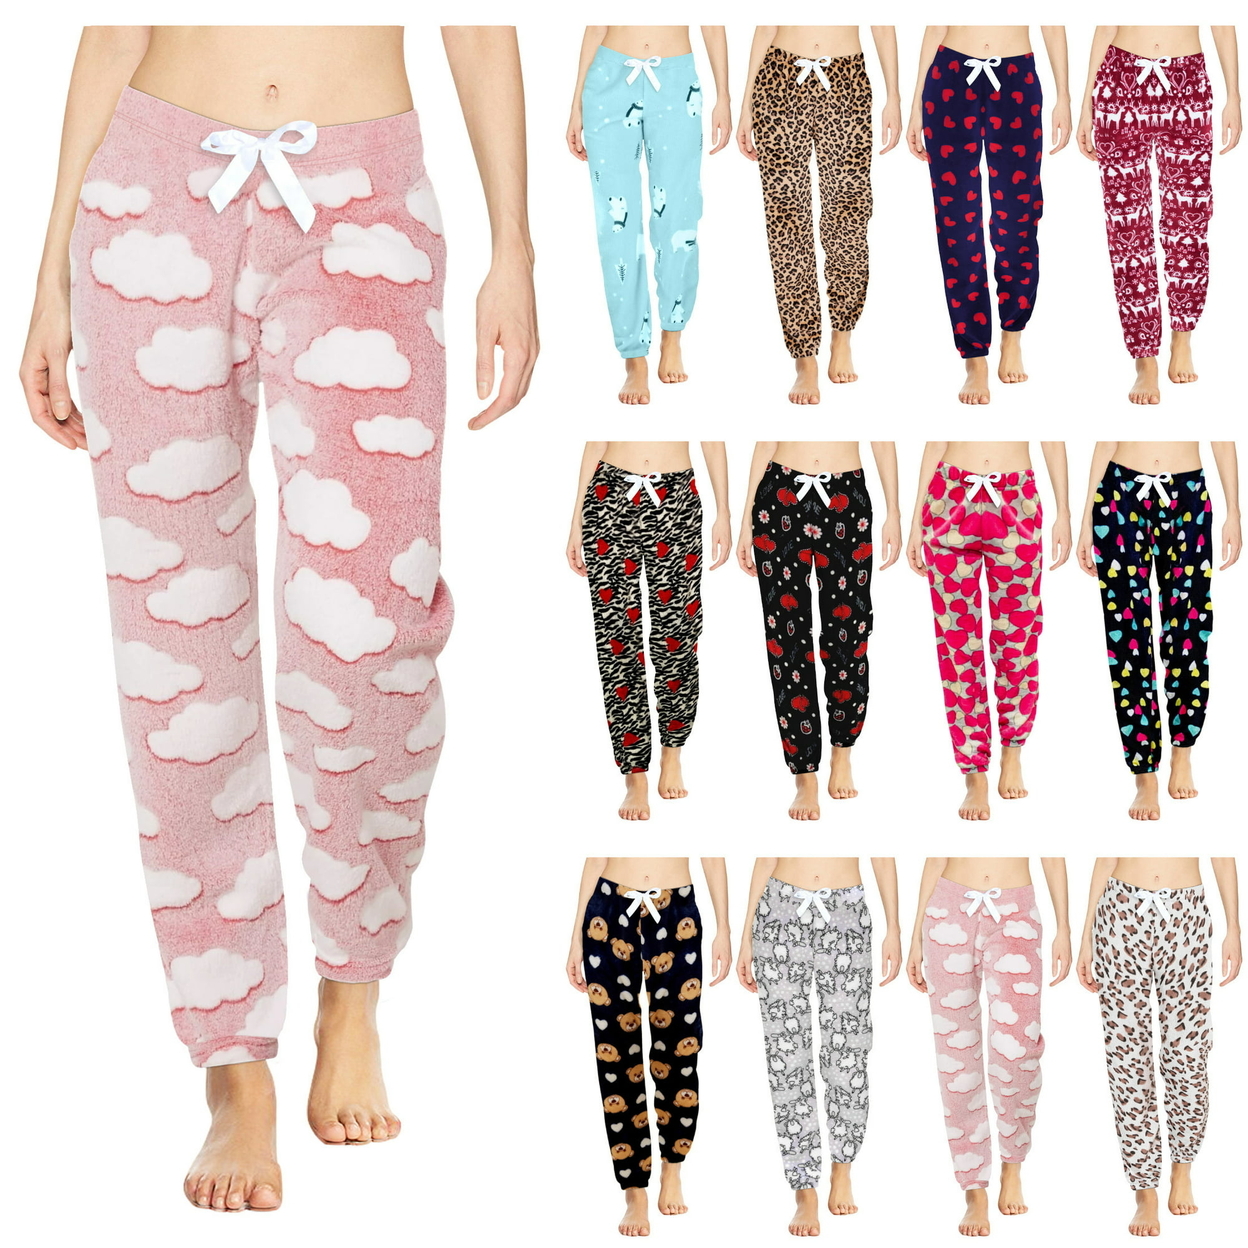 4-Pack: Women's Solid & Printed Ultra-Soft Comfy Stretch Micro-Fleece Pajama Lounge Pants - Small, Shapes